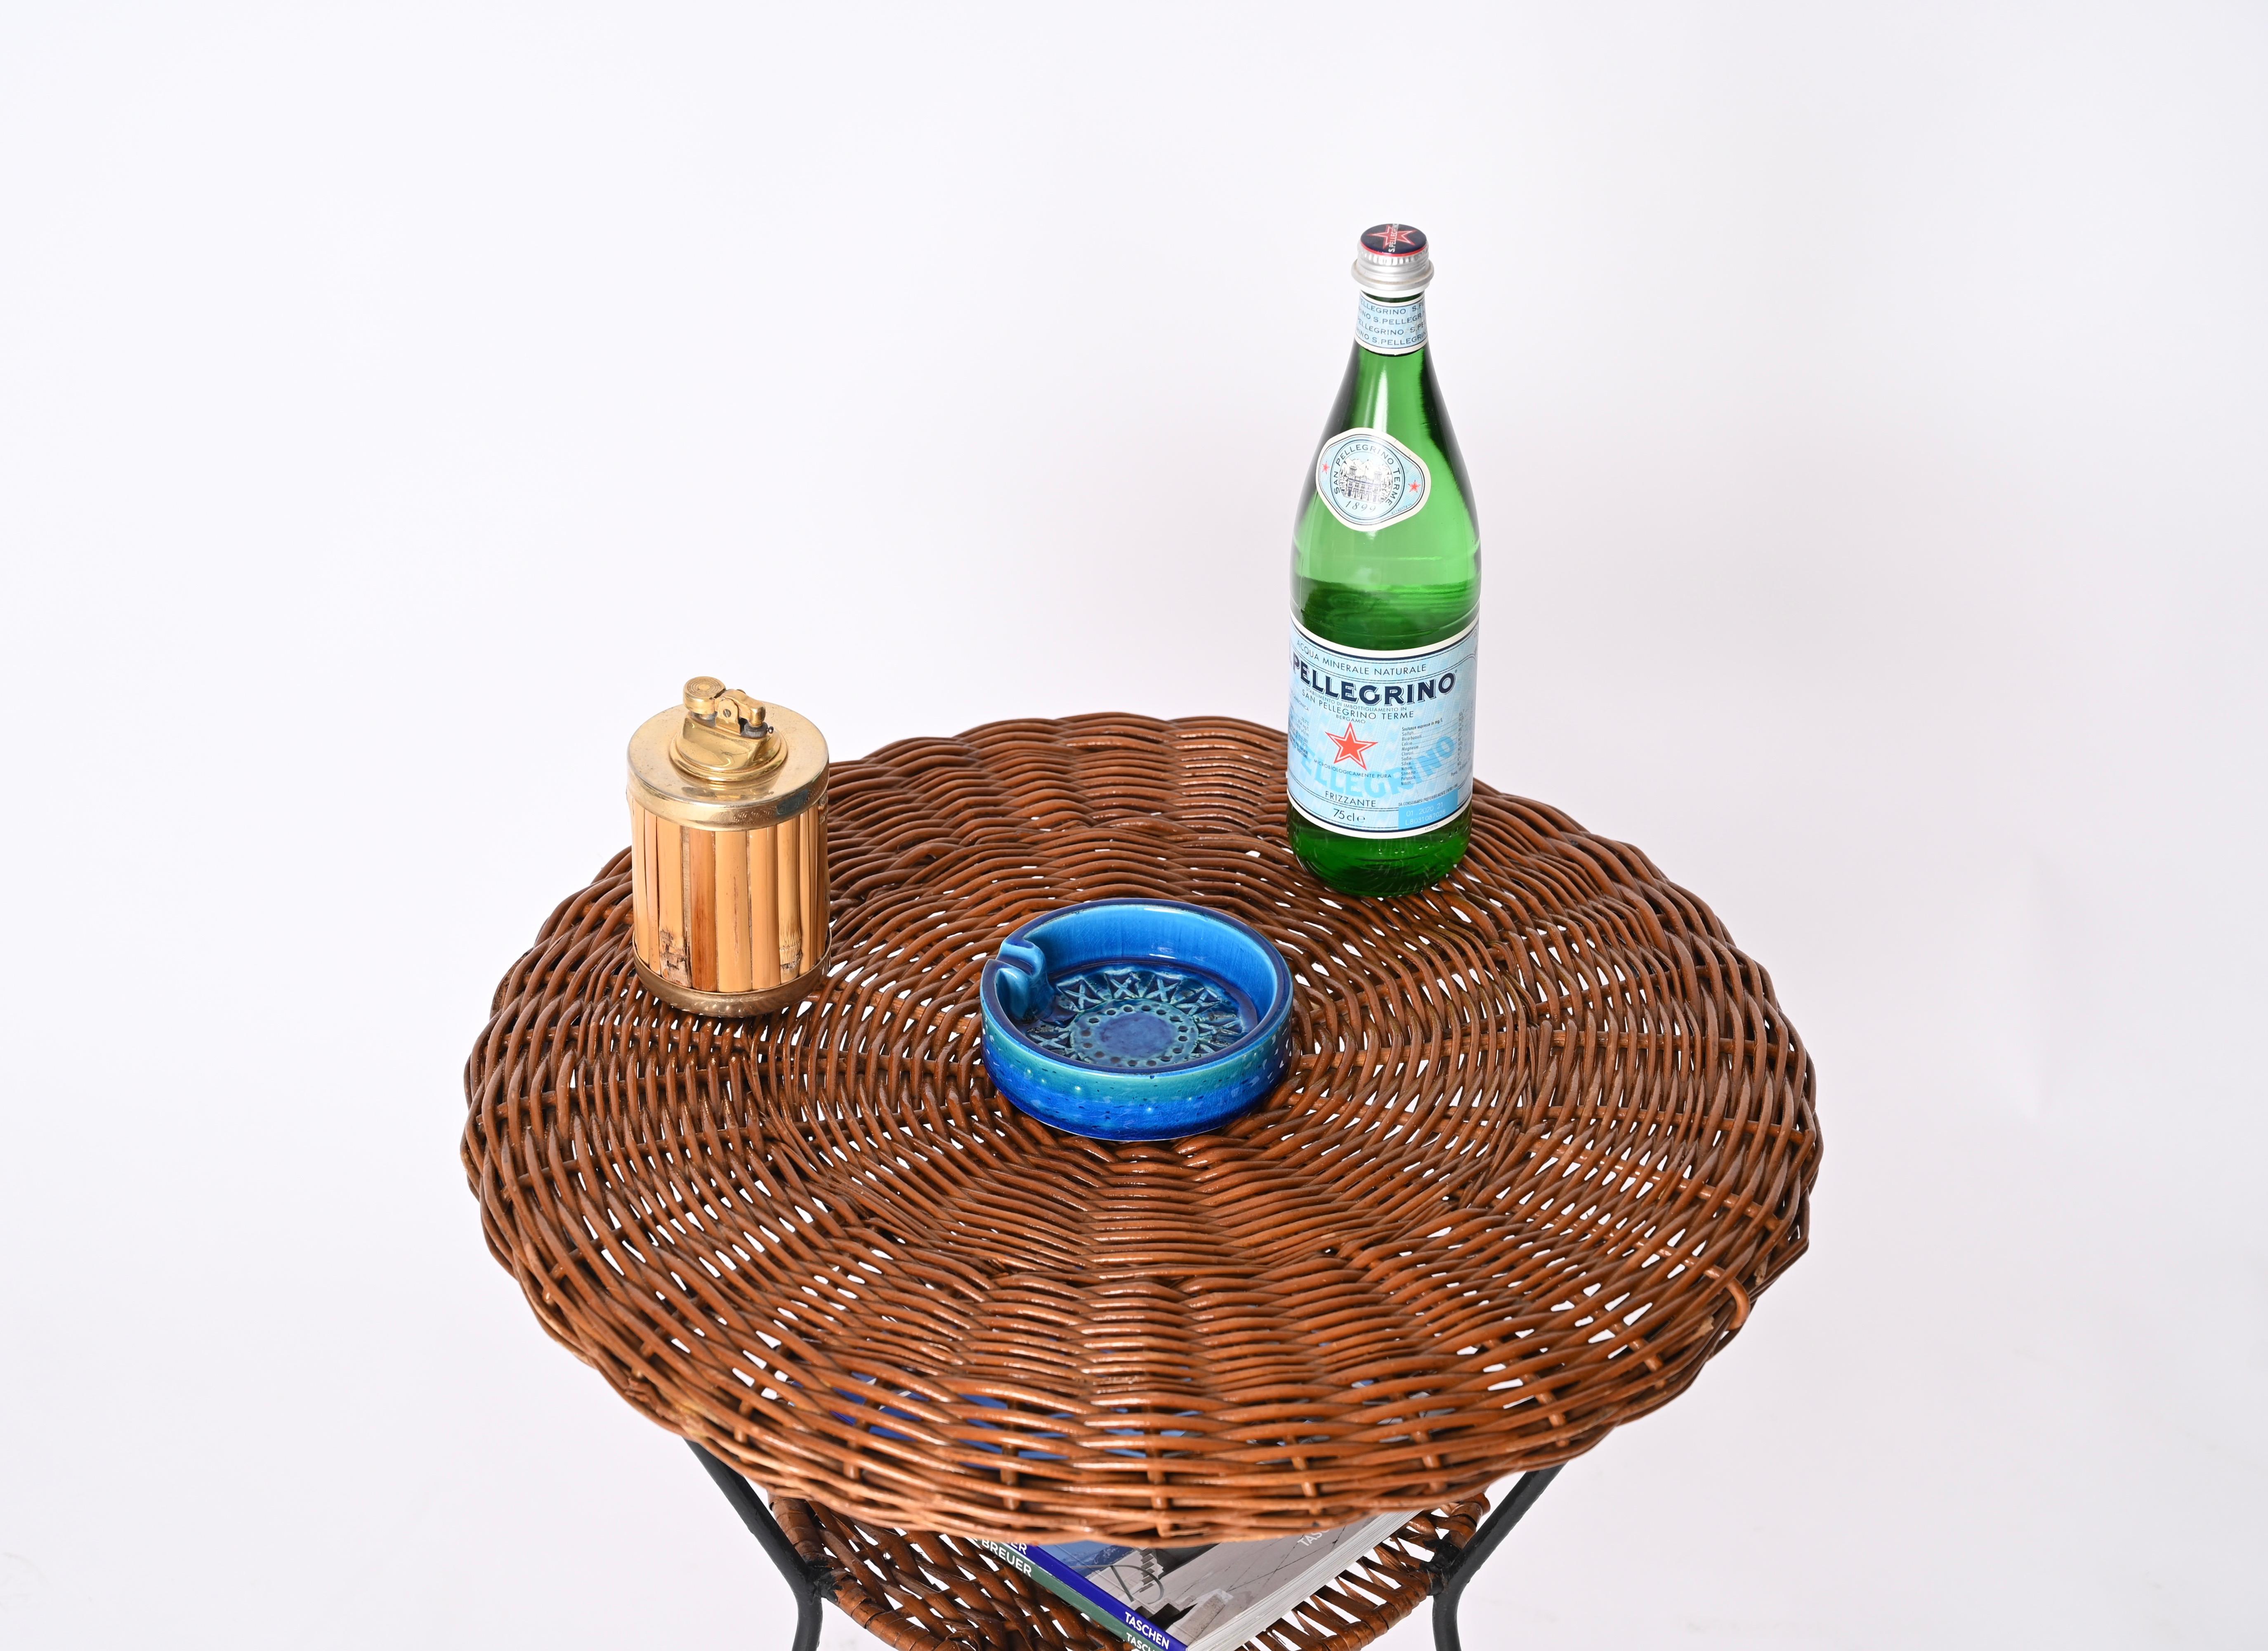 Woven Rattan, Wicker and Iron Two-Tier Round Coffee Table, Matégot, France 1960s For Sale 6